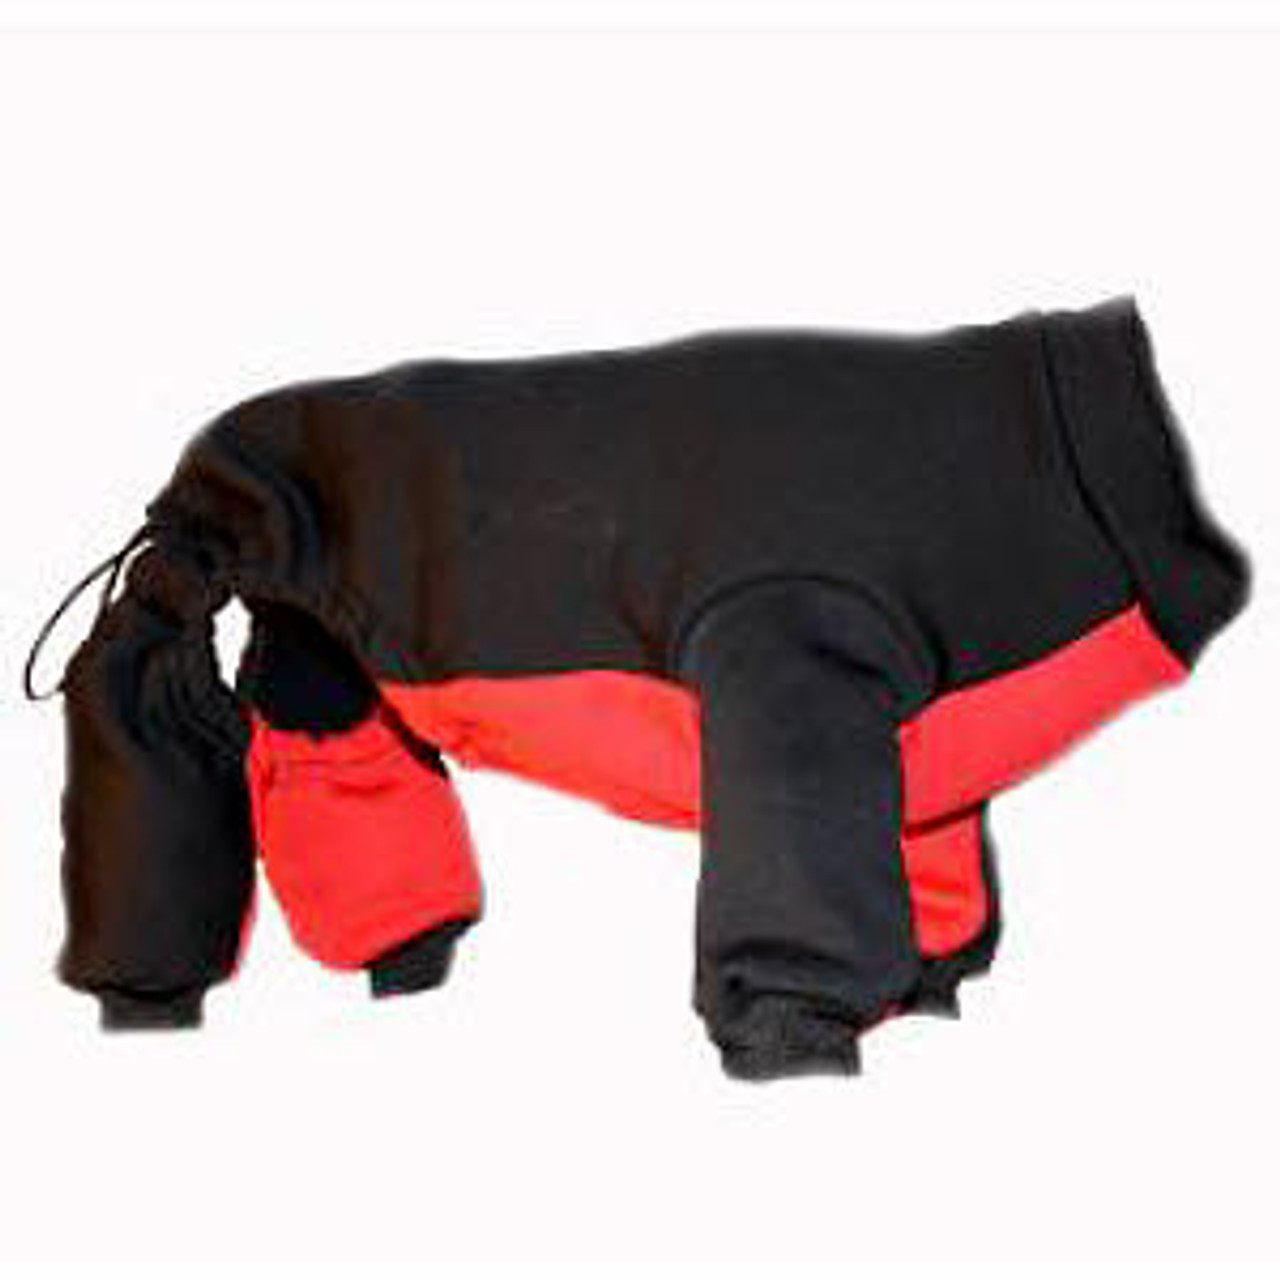 Dog Overall Snowsuit - Black/Red - 5 - 110 lbs